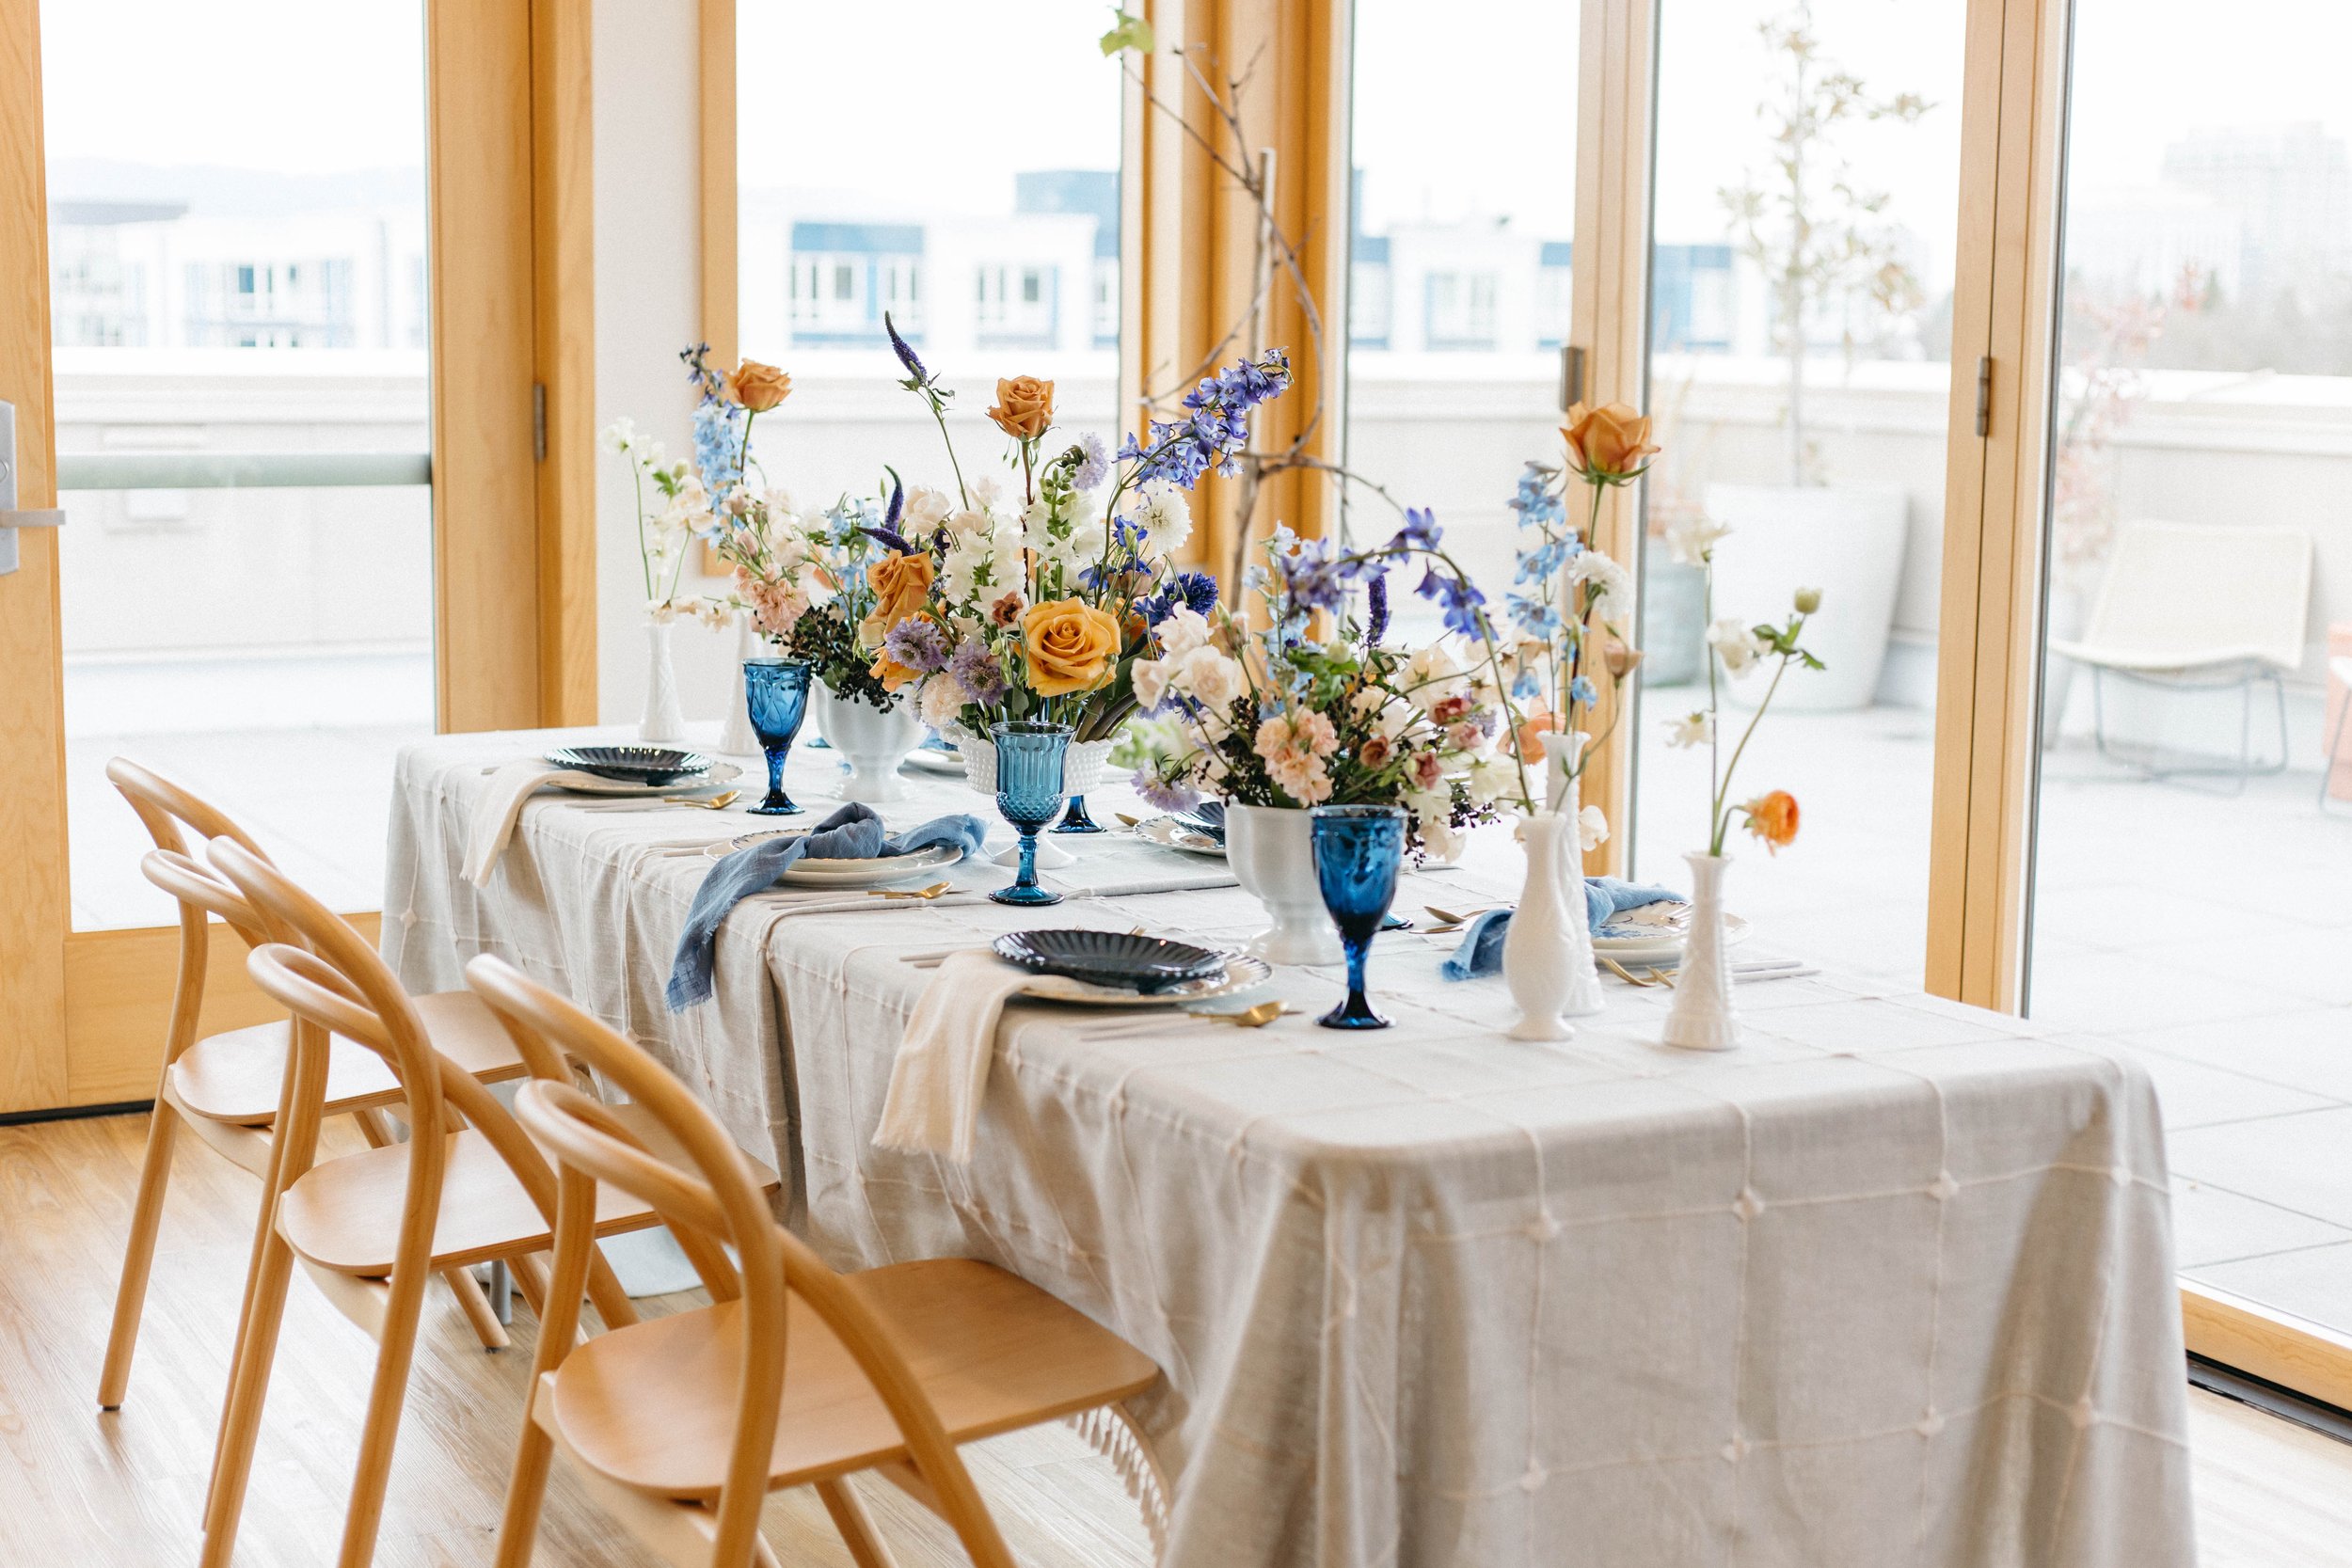  colorful whimsical small wedding elopement in Portland, Oregon. Lolo pass hotel. Purple, blue, orange floral arrangement, fine china, beatutiful place setting, private rooftop vows 